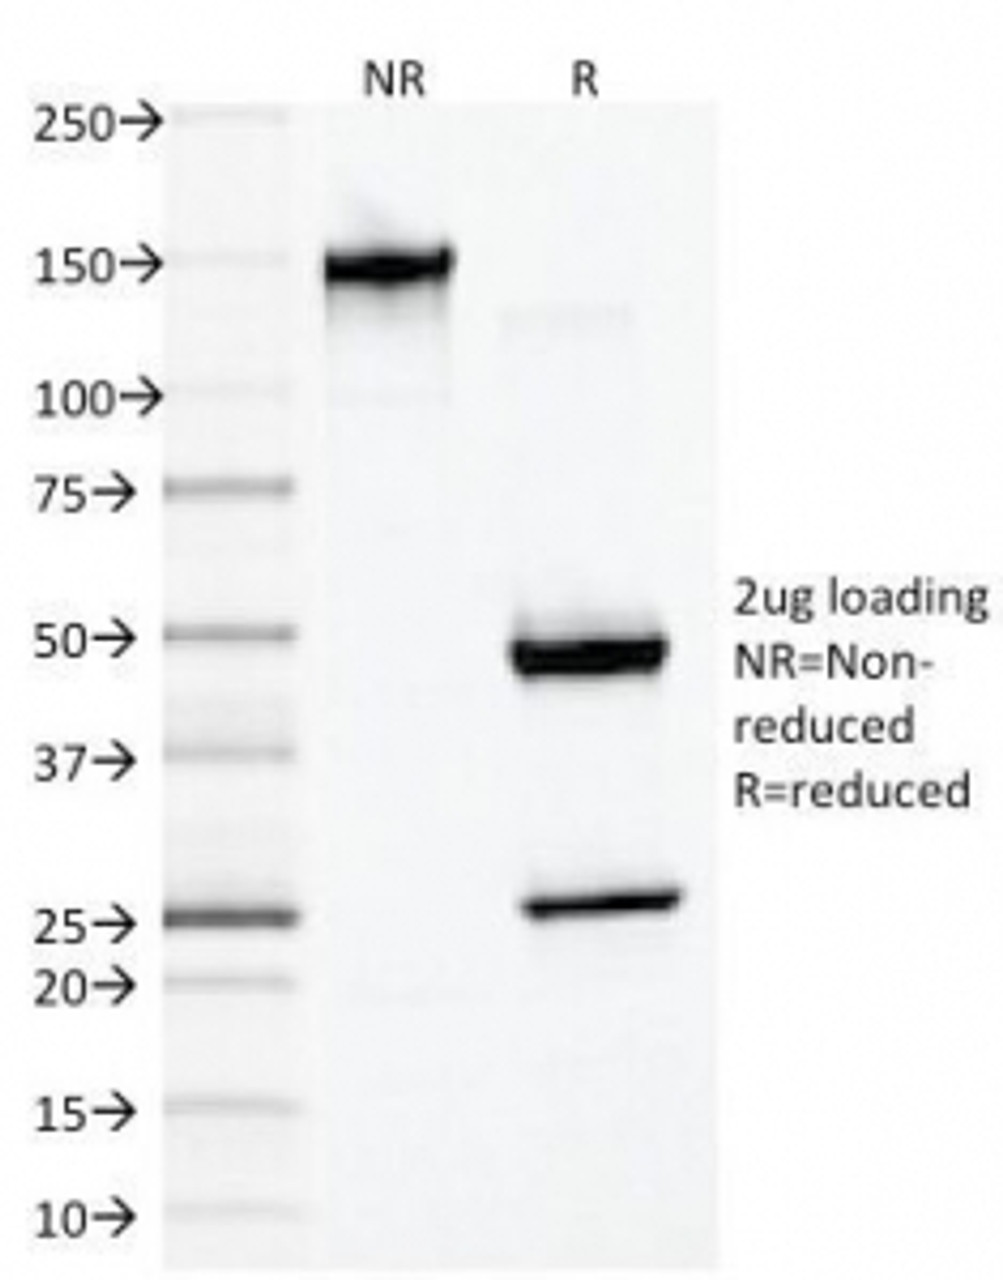 SDS-PAGE Analysis of Purified, BSA-Free Desmin Antibody (clone DES/1711) . Confirmation of Integrity and Purity of the Antibody.